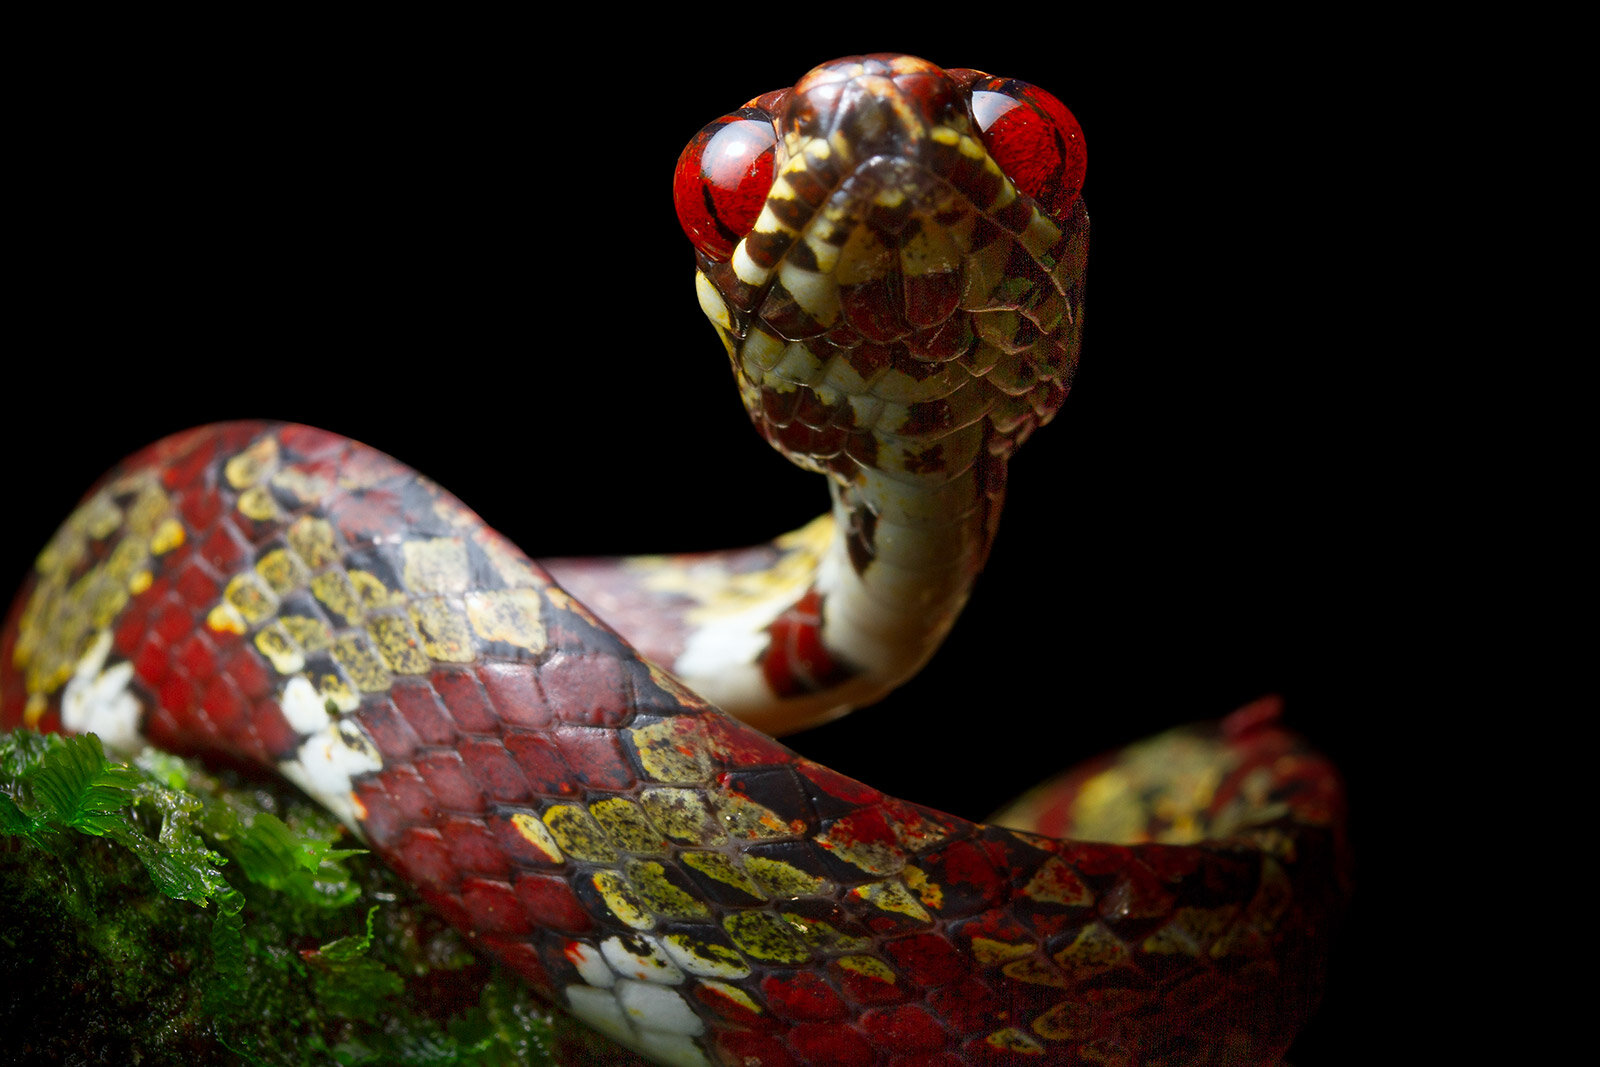 photo of Newly-named species of tree-dwelling snakes threatened by mining image